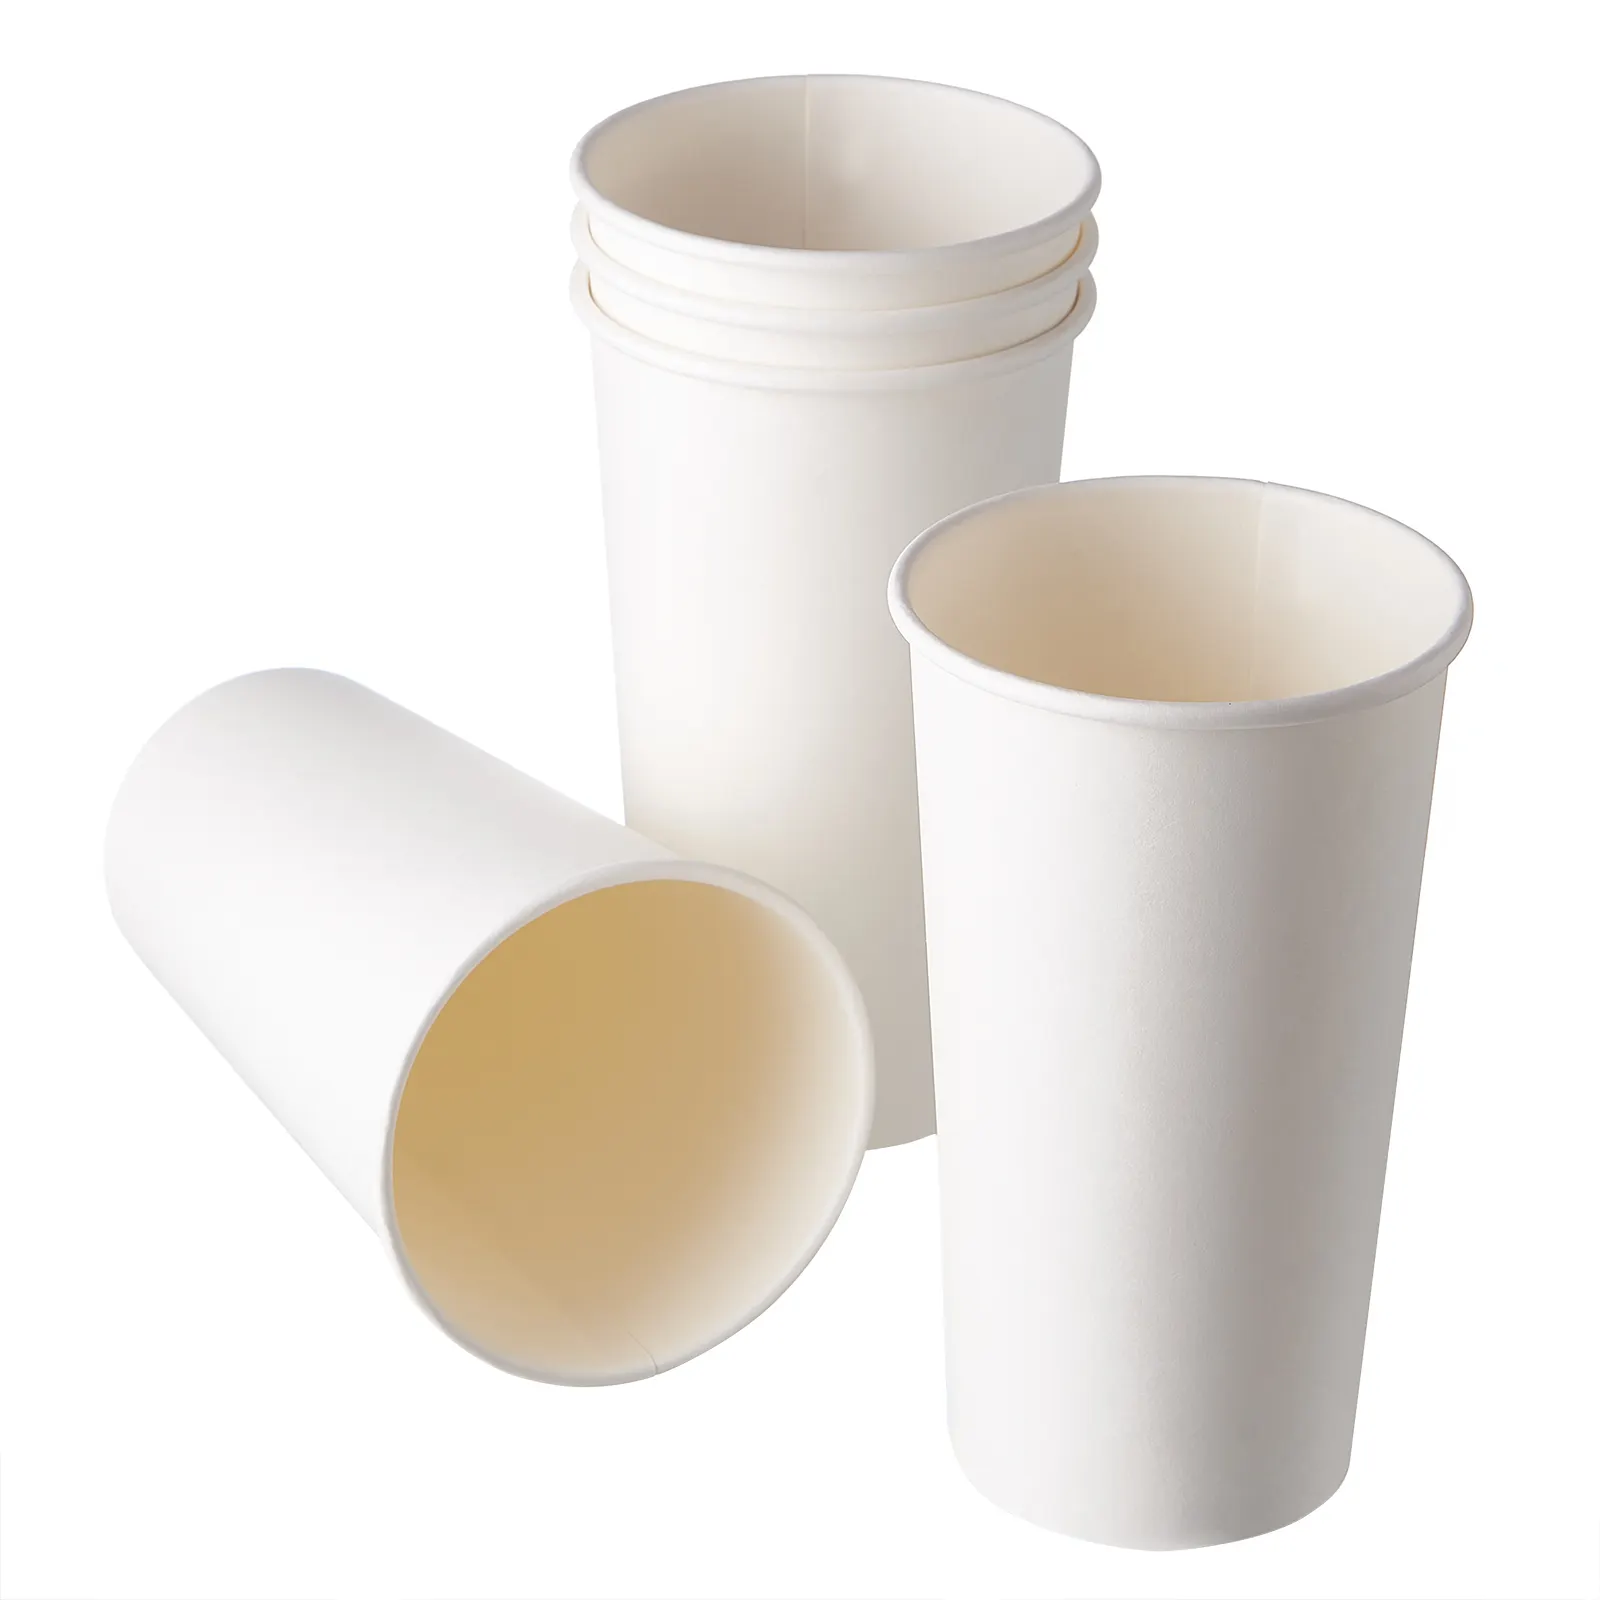 FULING Wholesale Disposable Single Wall Hot Coffee White Paper Cups with Lids